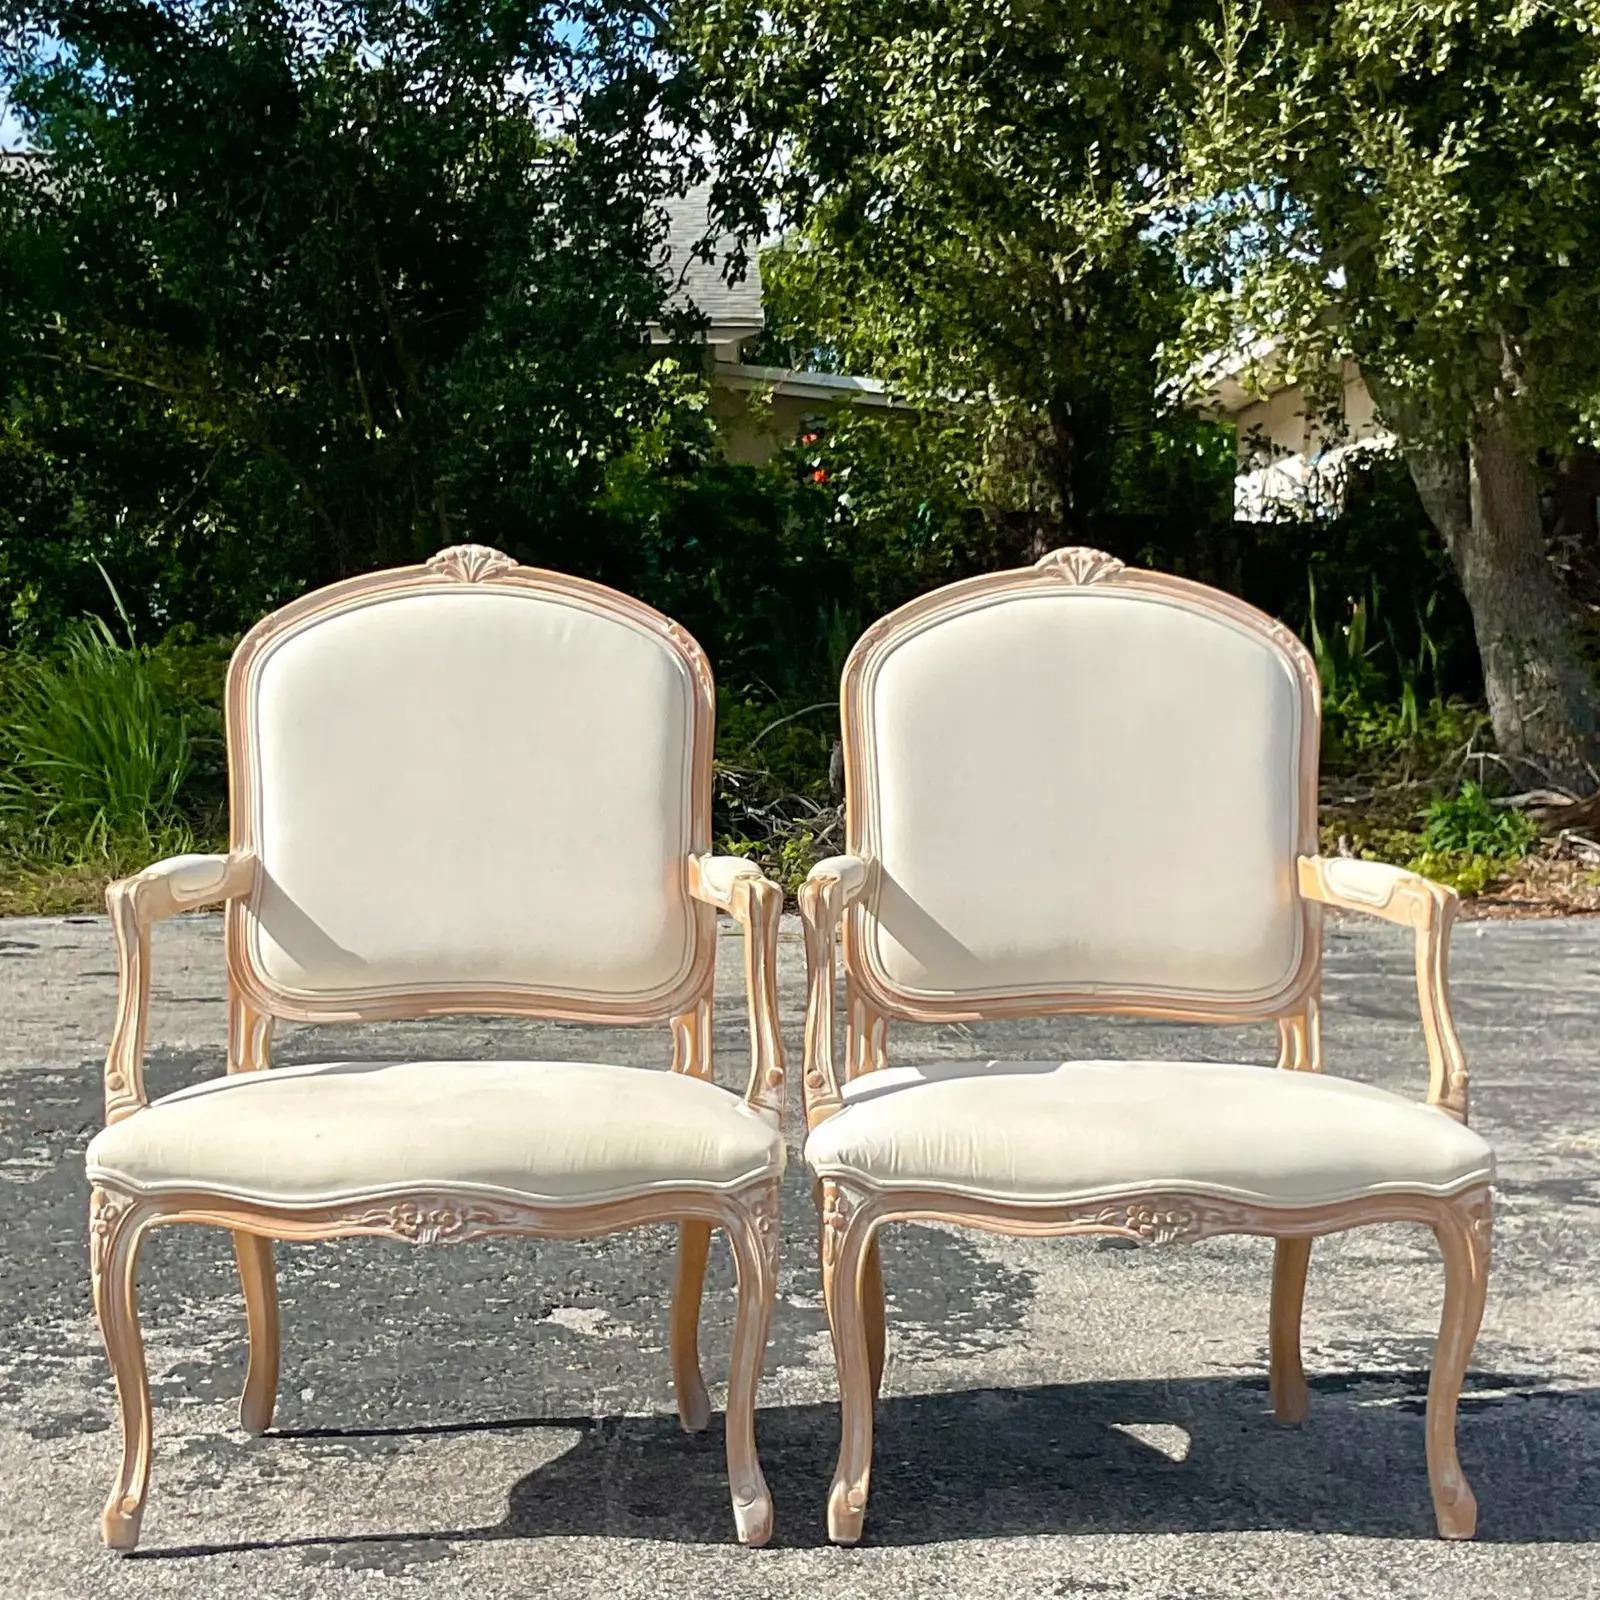 A fabulous pair of vintage Regency Bergere chairs. Beautiful hand carved detail on the classic shape. Acquired from a Palm Beach estate.